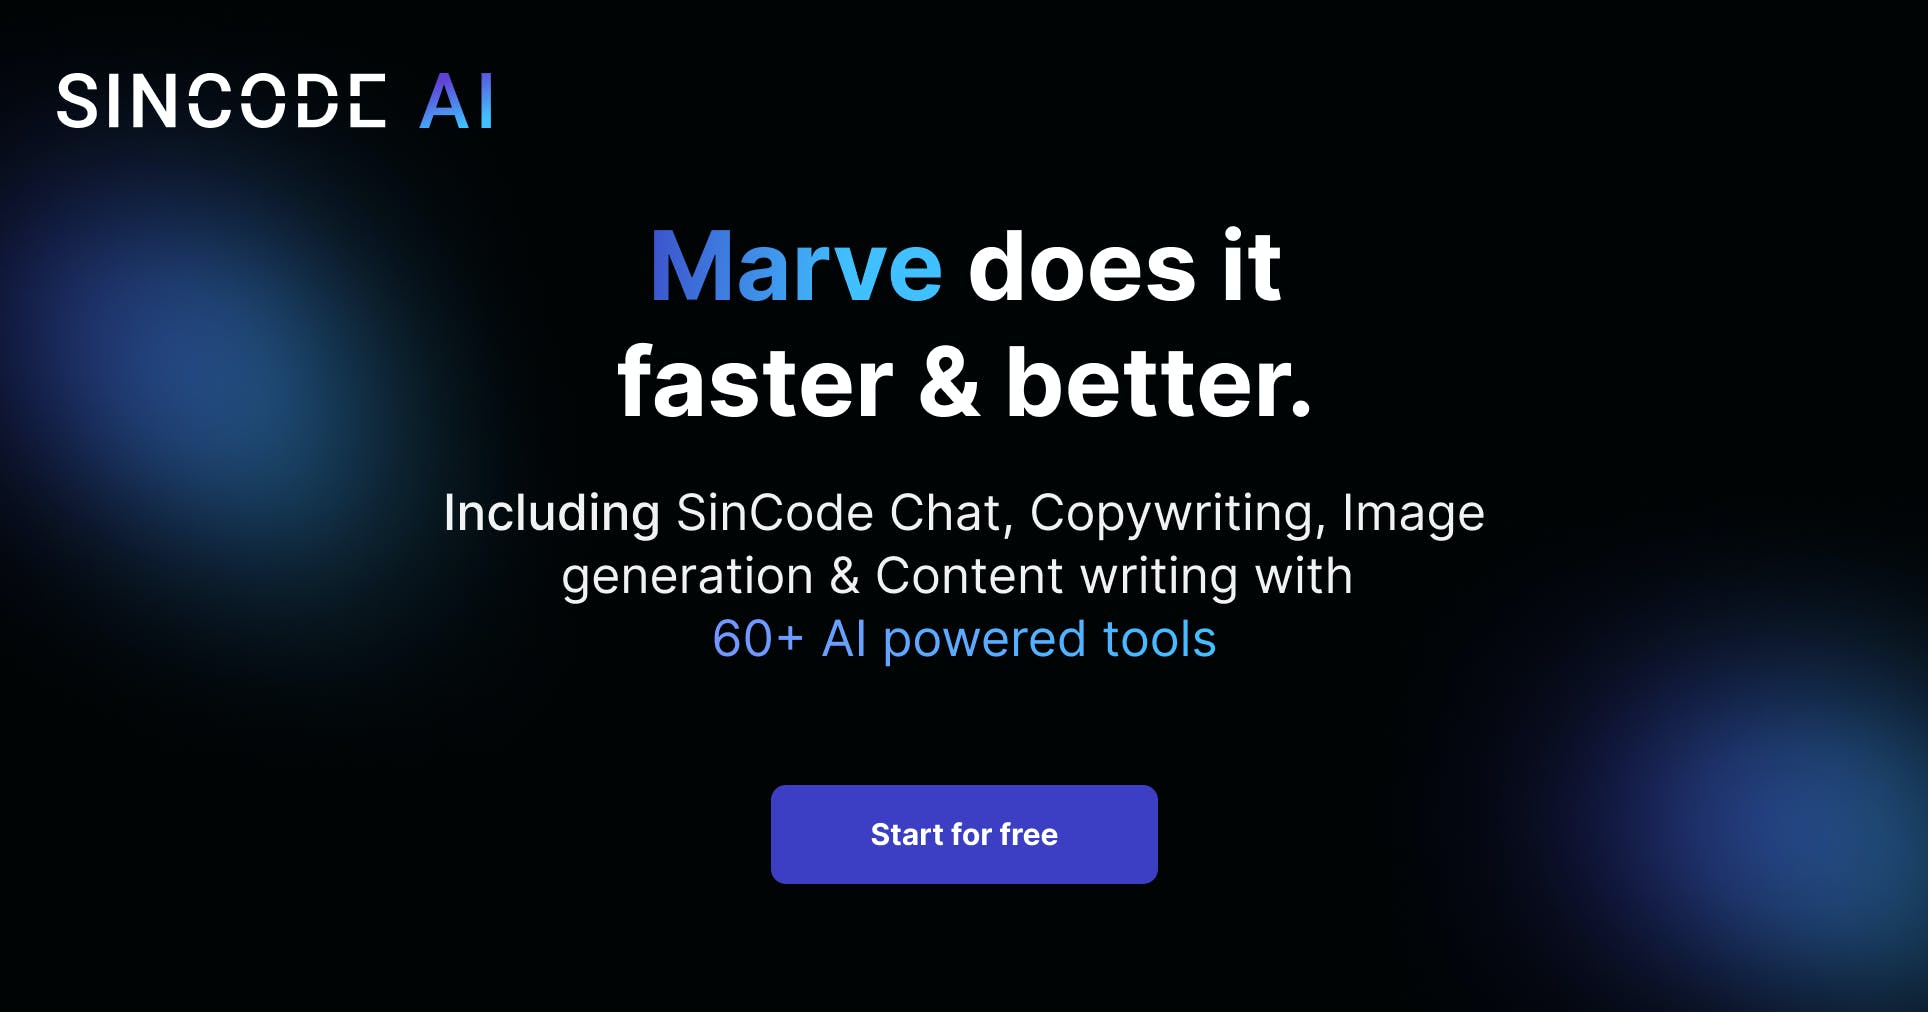 SinCode AI - A tool for content creation